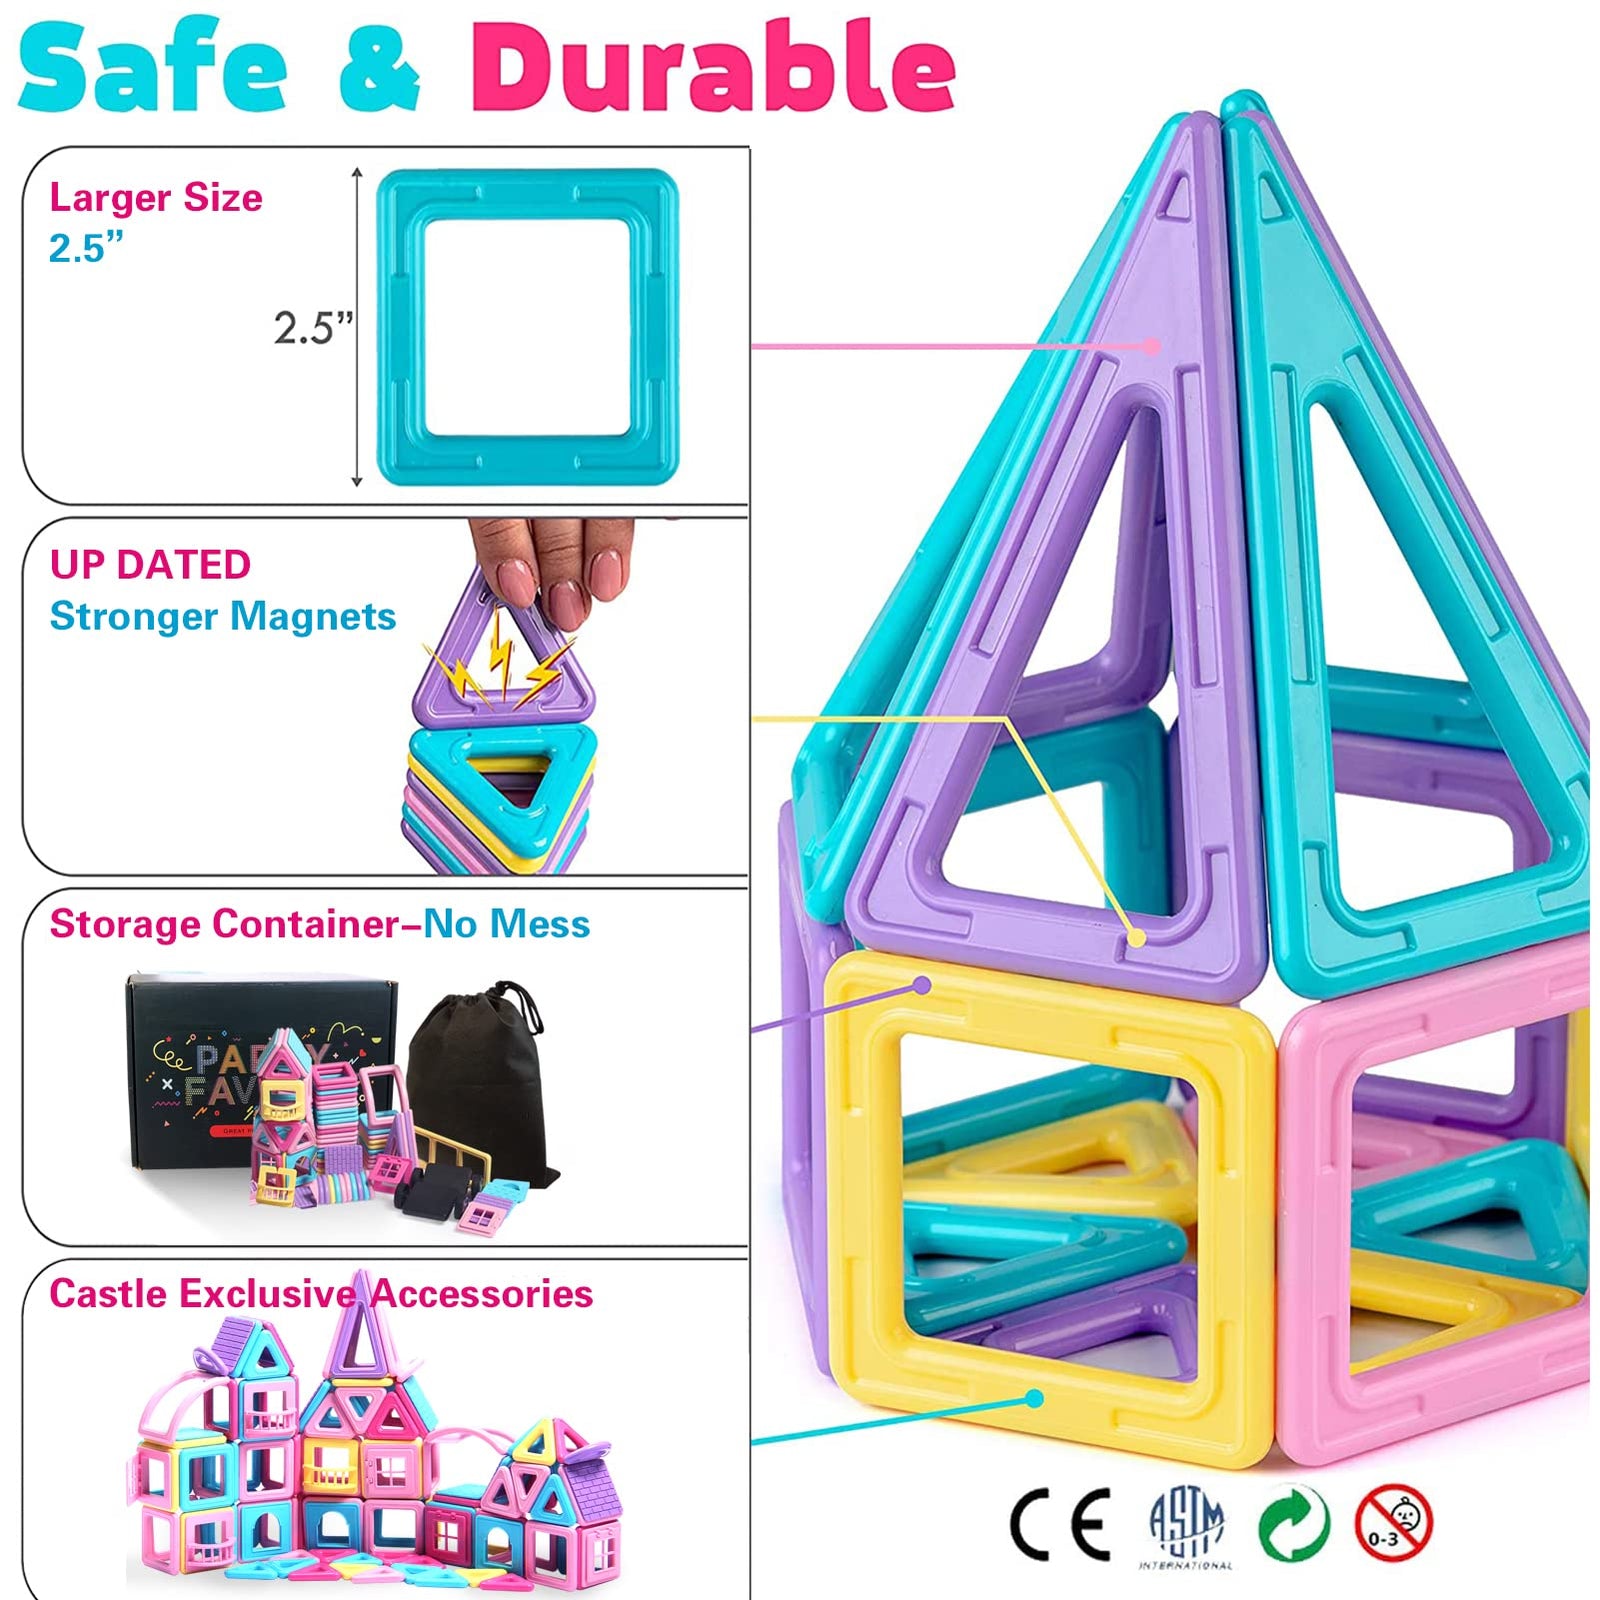 Magnetic Tiles for 3 4 5 6 7 8+ Year Old Boys Girls Magnetic Blocks Building Set for Kids Ages 3-6, Creativity and Educational Construction Toys for Toddlers 3-5 Christmas Birthday Gifts Toys-117PCS